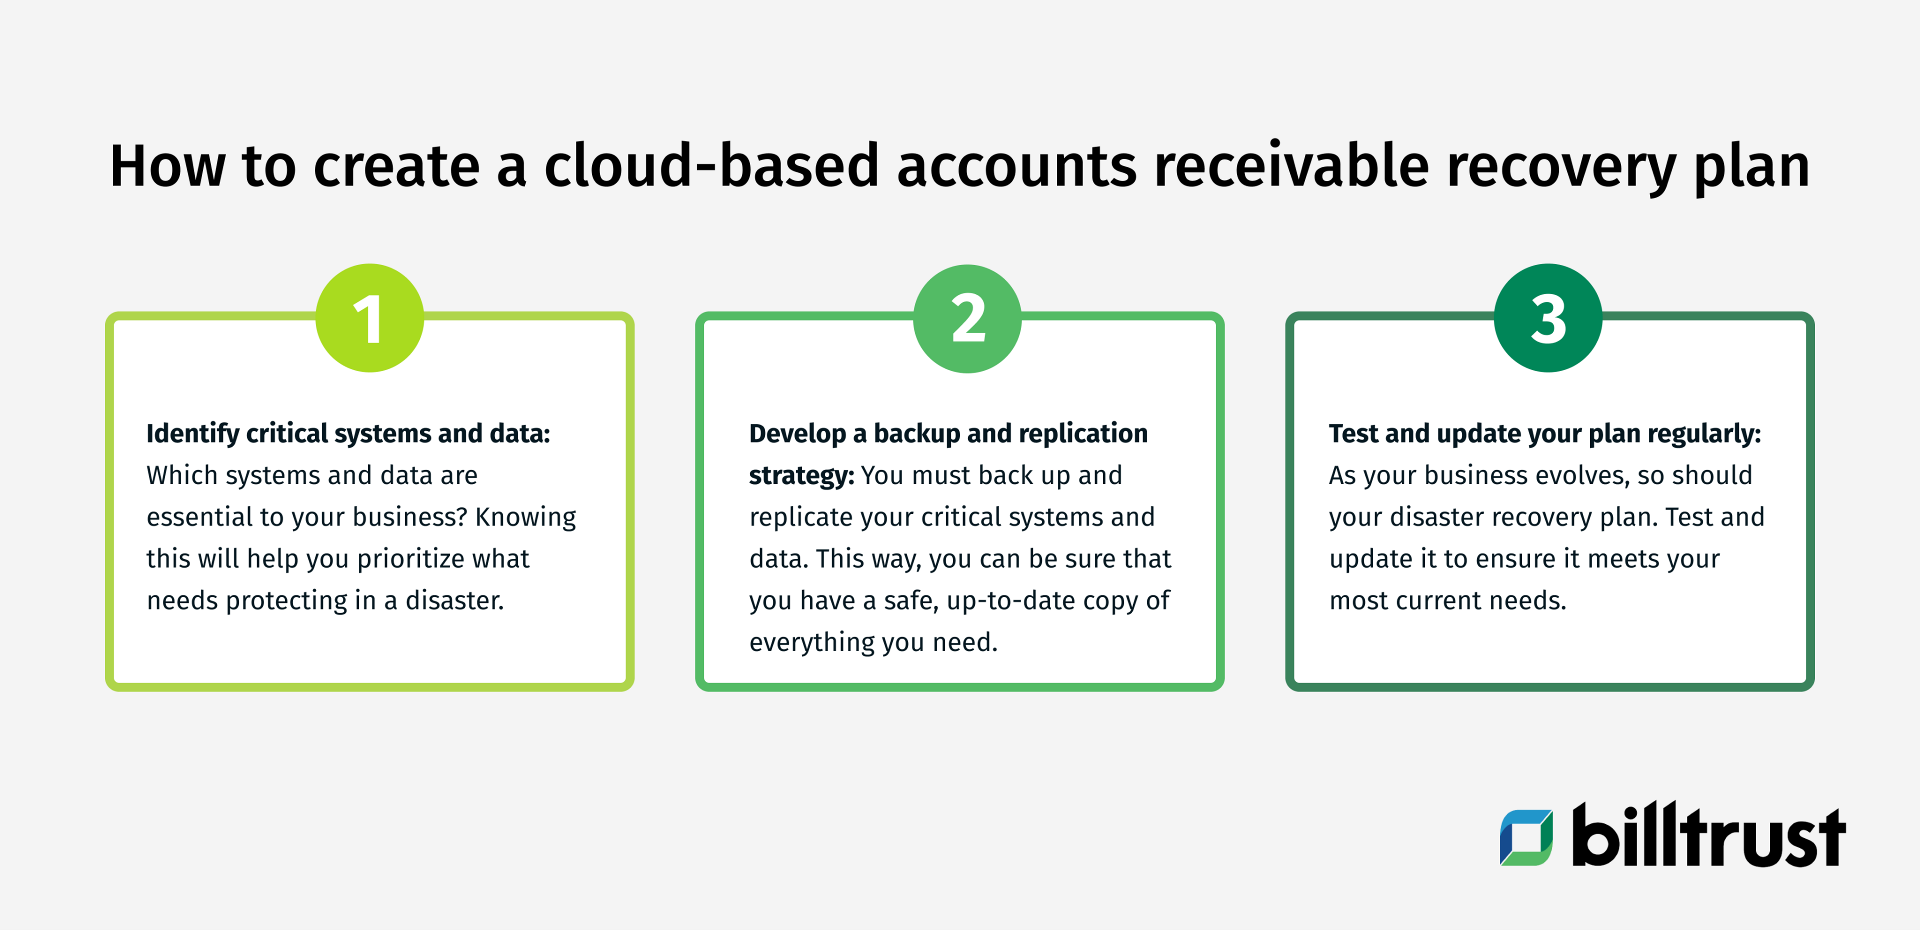 steps to take when creating a cloud-based accounts receivable recovery plan